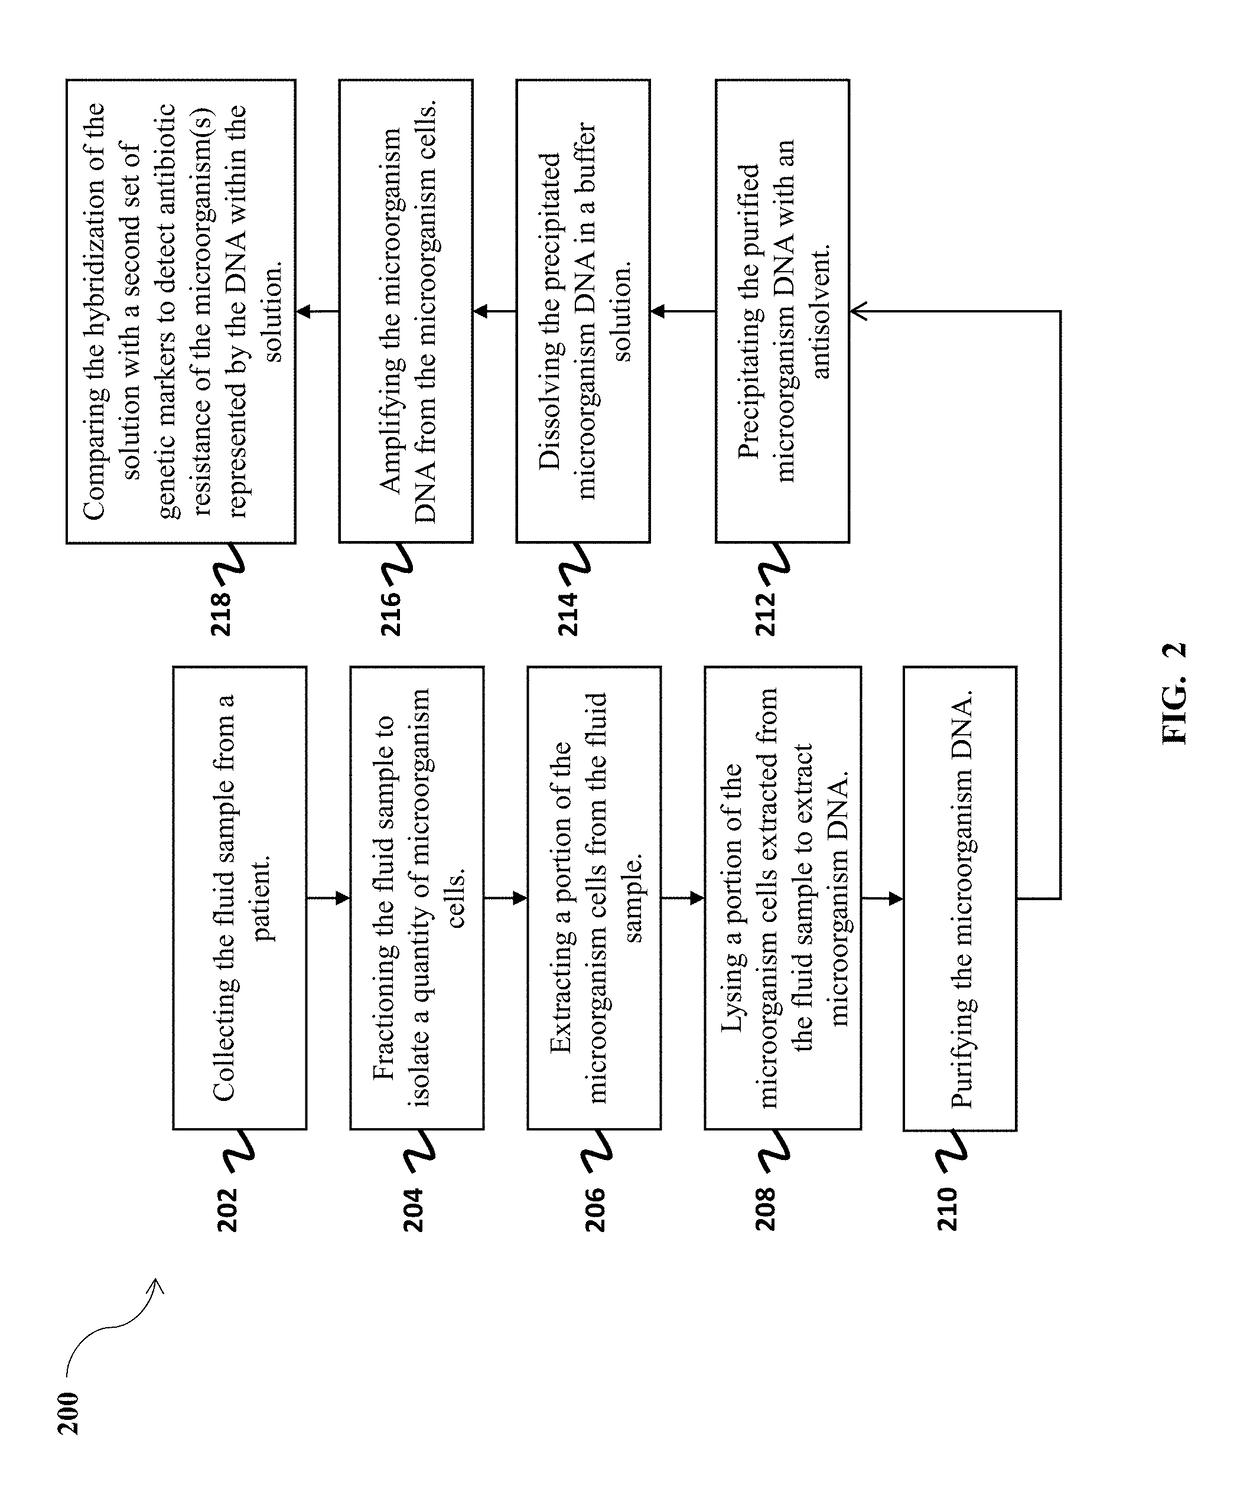 Method for detecting bacterial and fungal pathogens